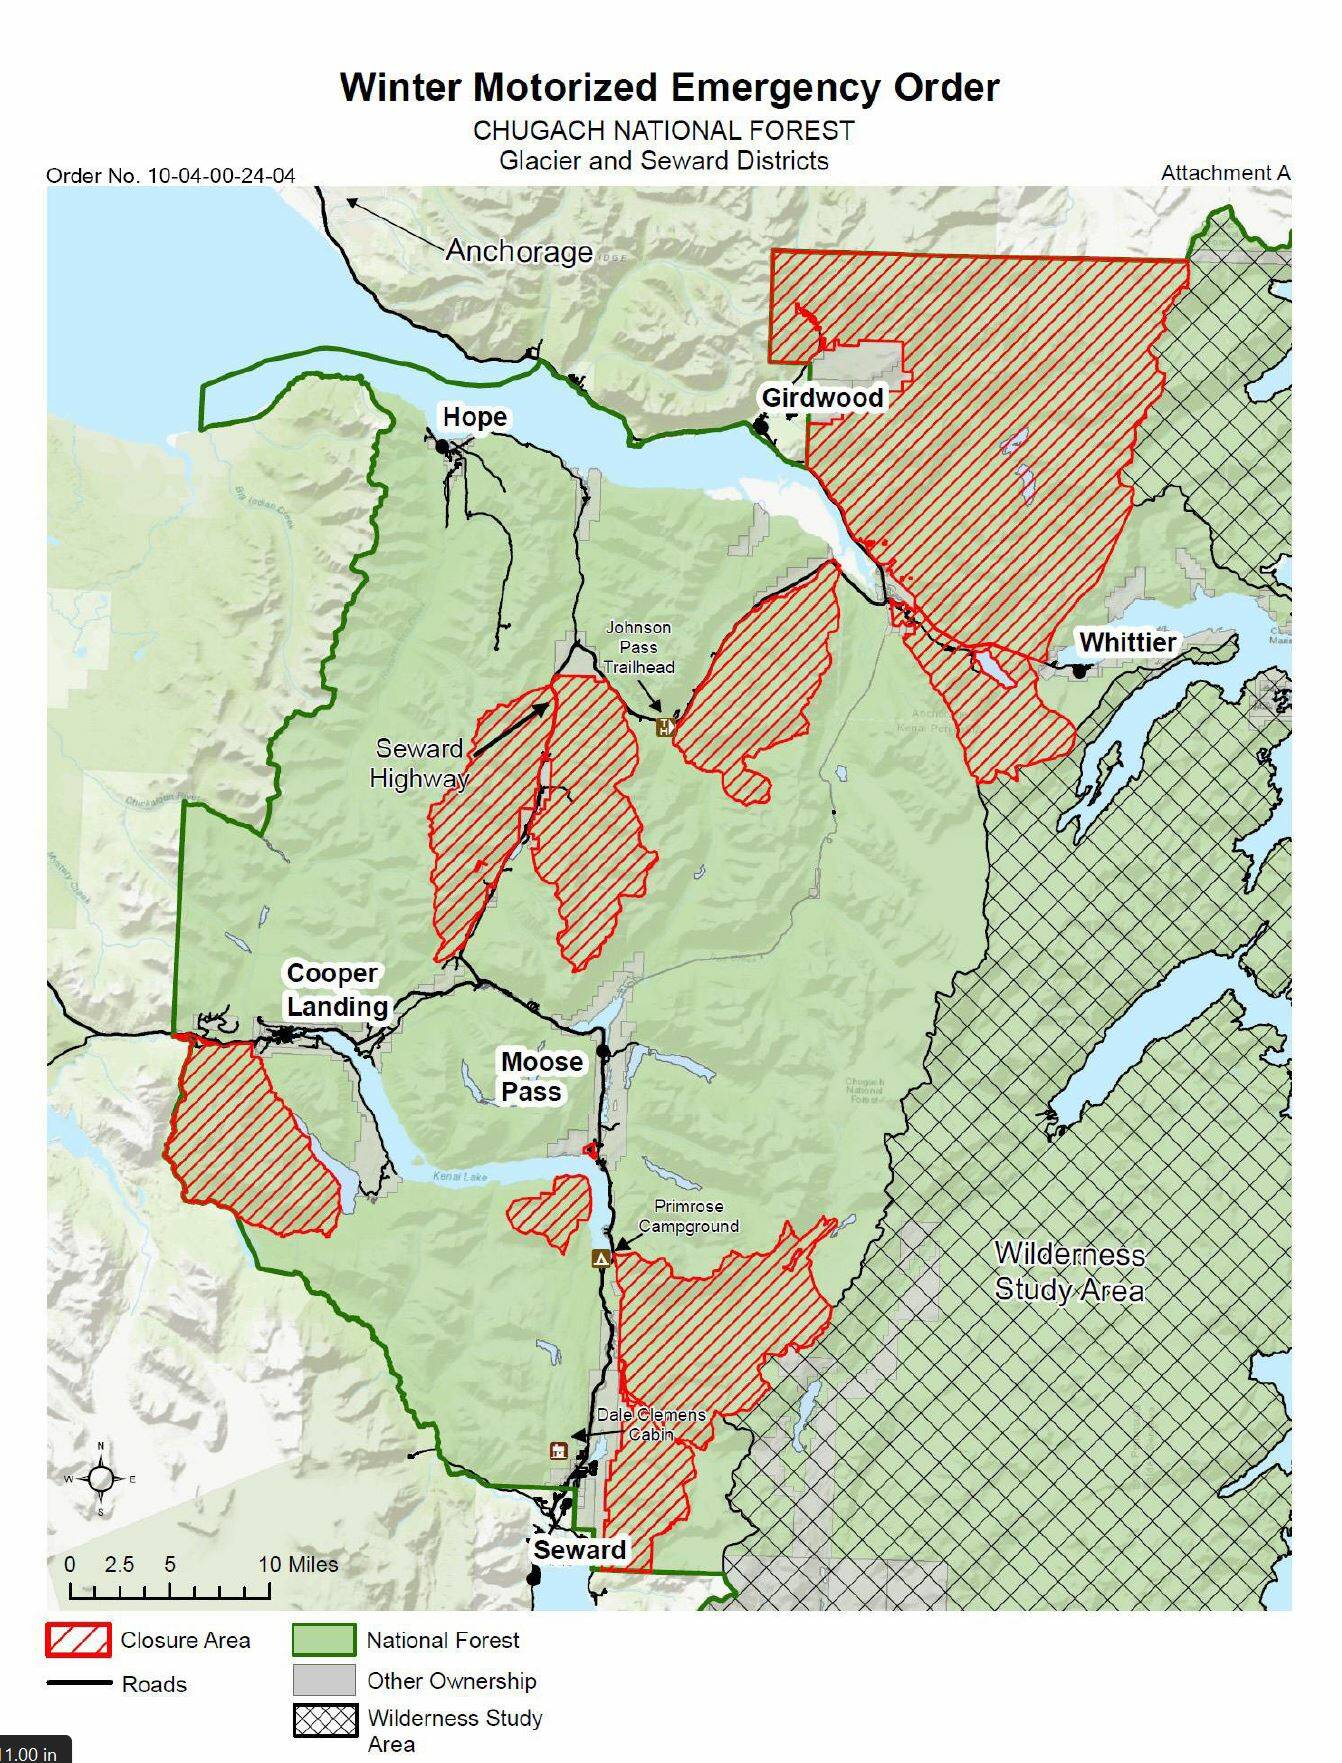 A map of areas closed to snowmachine use in the Chugach National Forest. (Provided by U.S. Forest Service)